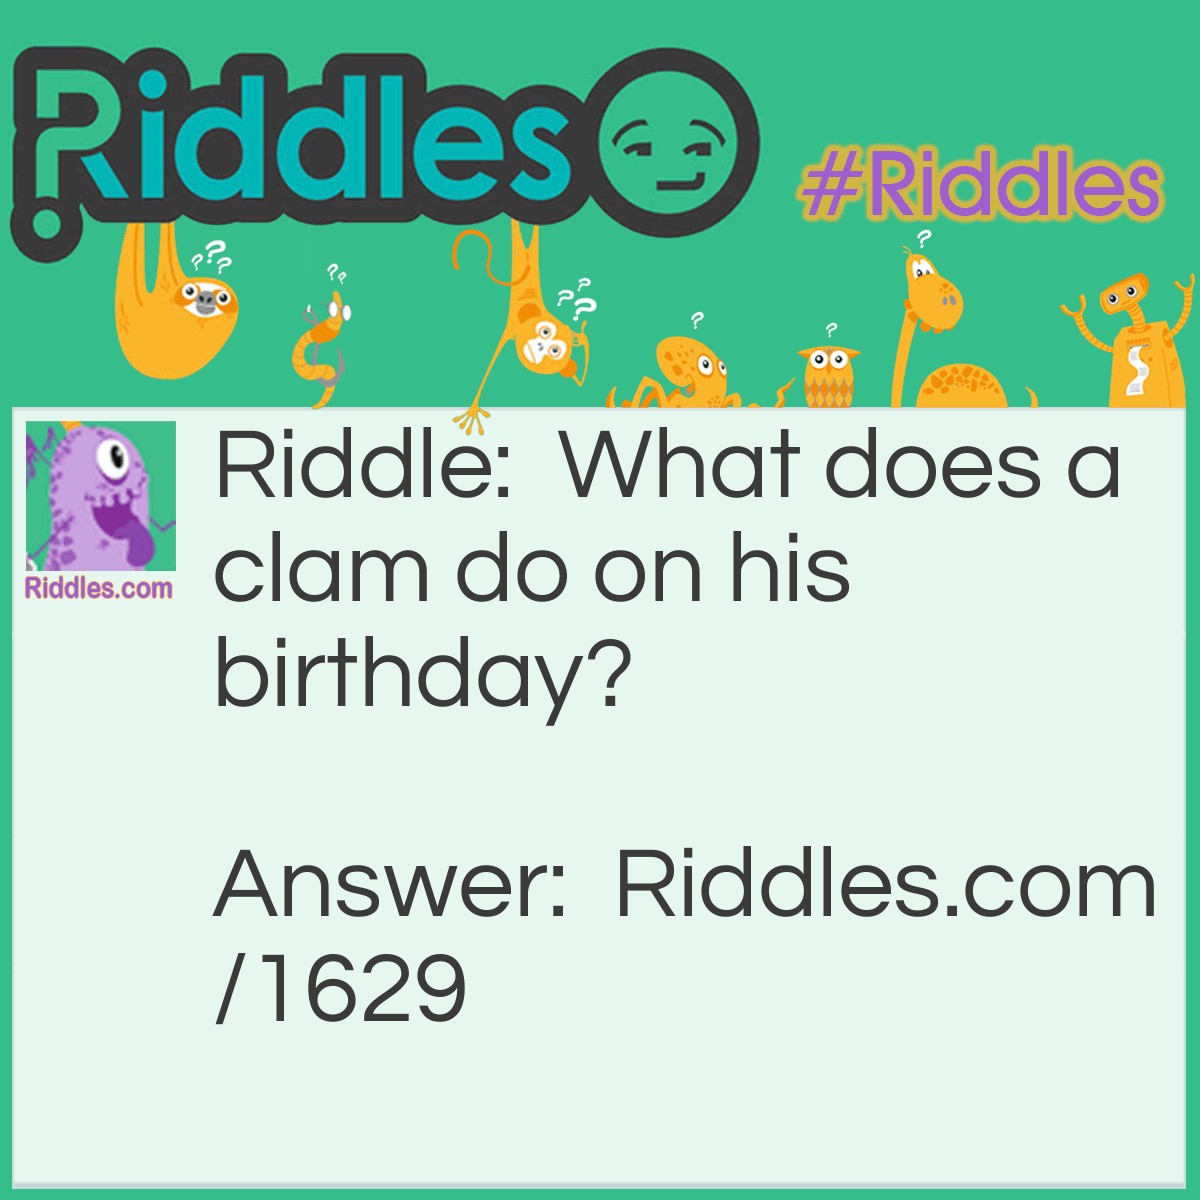 Riddle: What does a clam do on his birthday? Answer: He shellebrates!